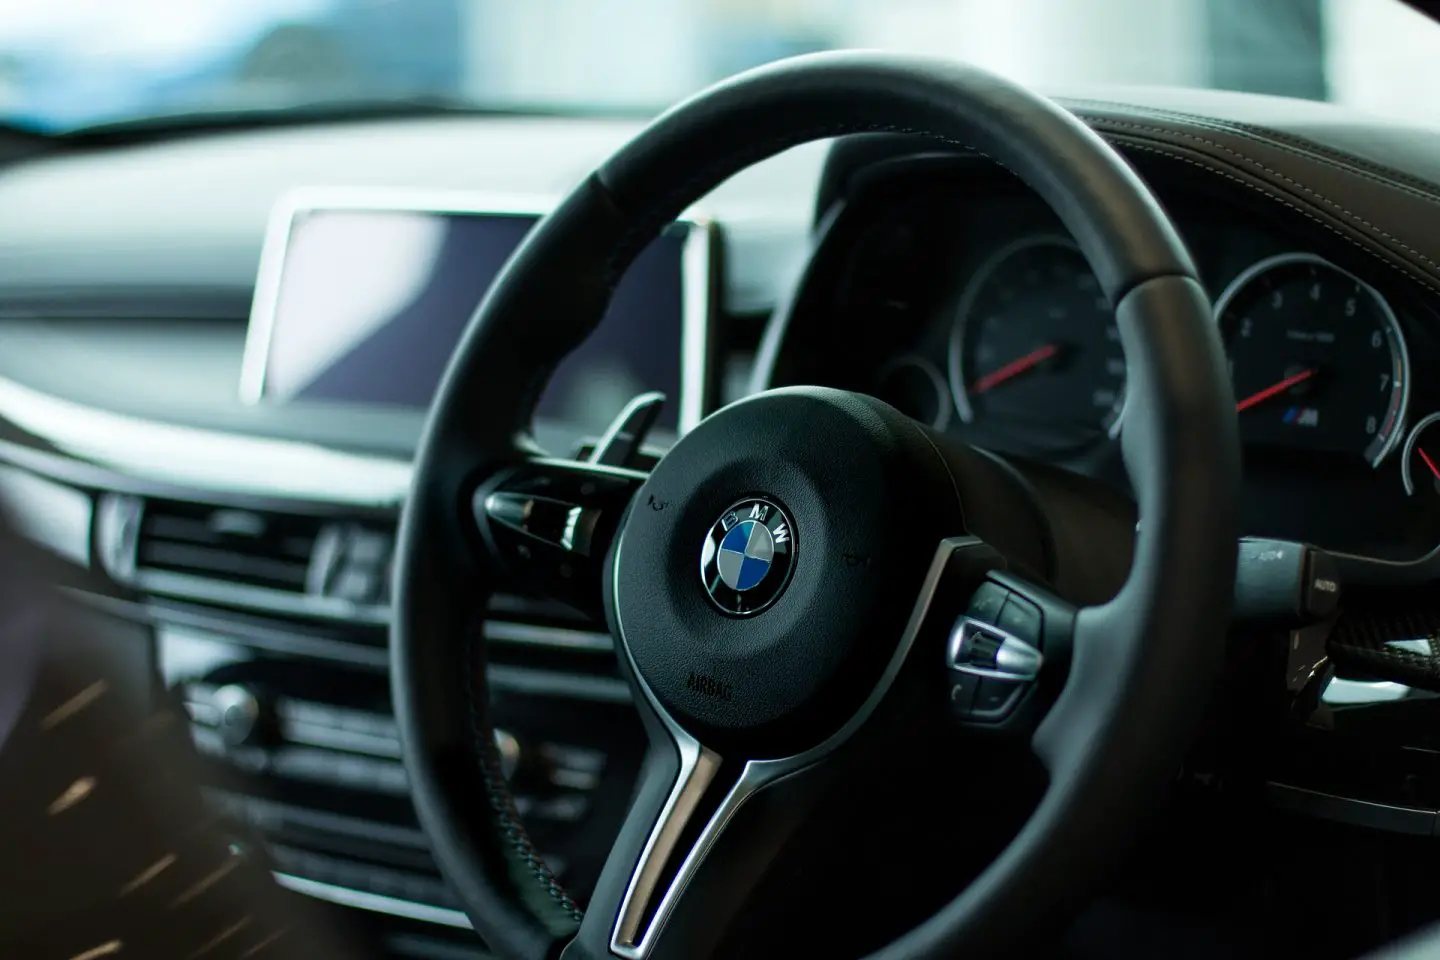 The steering wheel of a BMW car